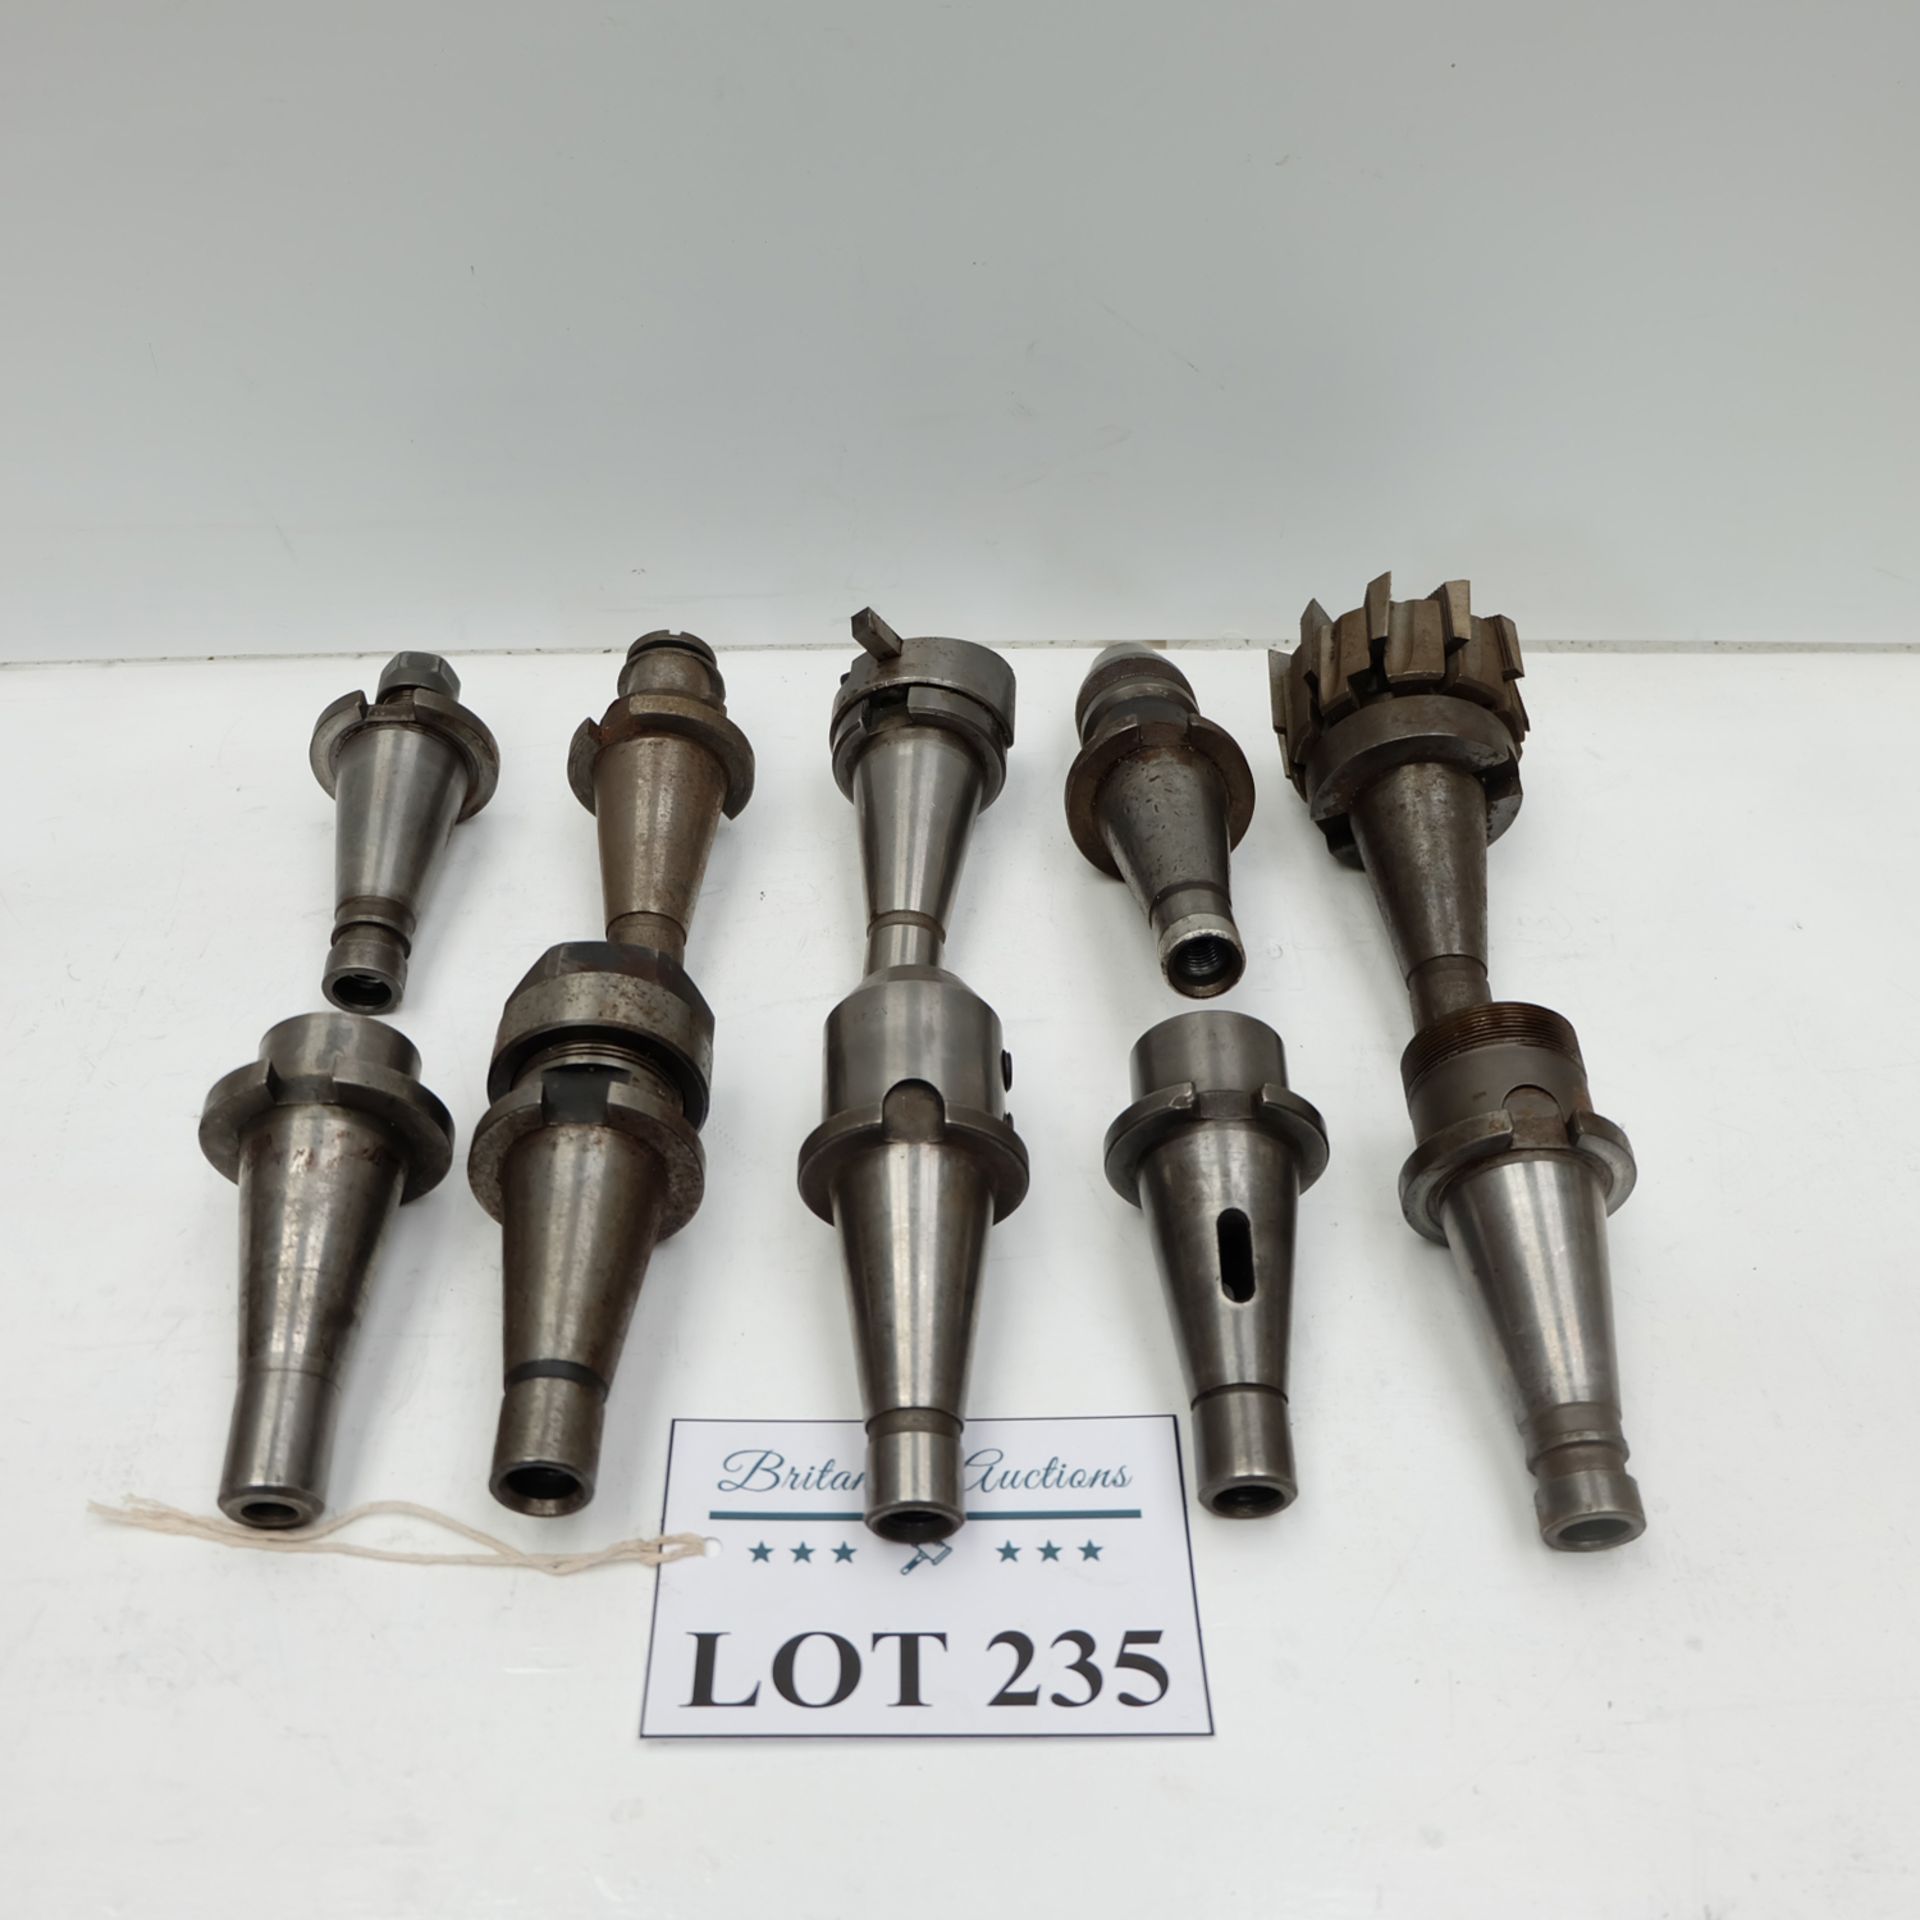 Quantity of 10 x 40 ISO Spindle Tooling.